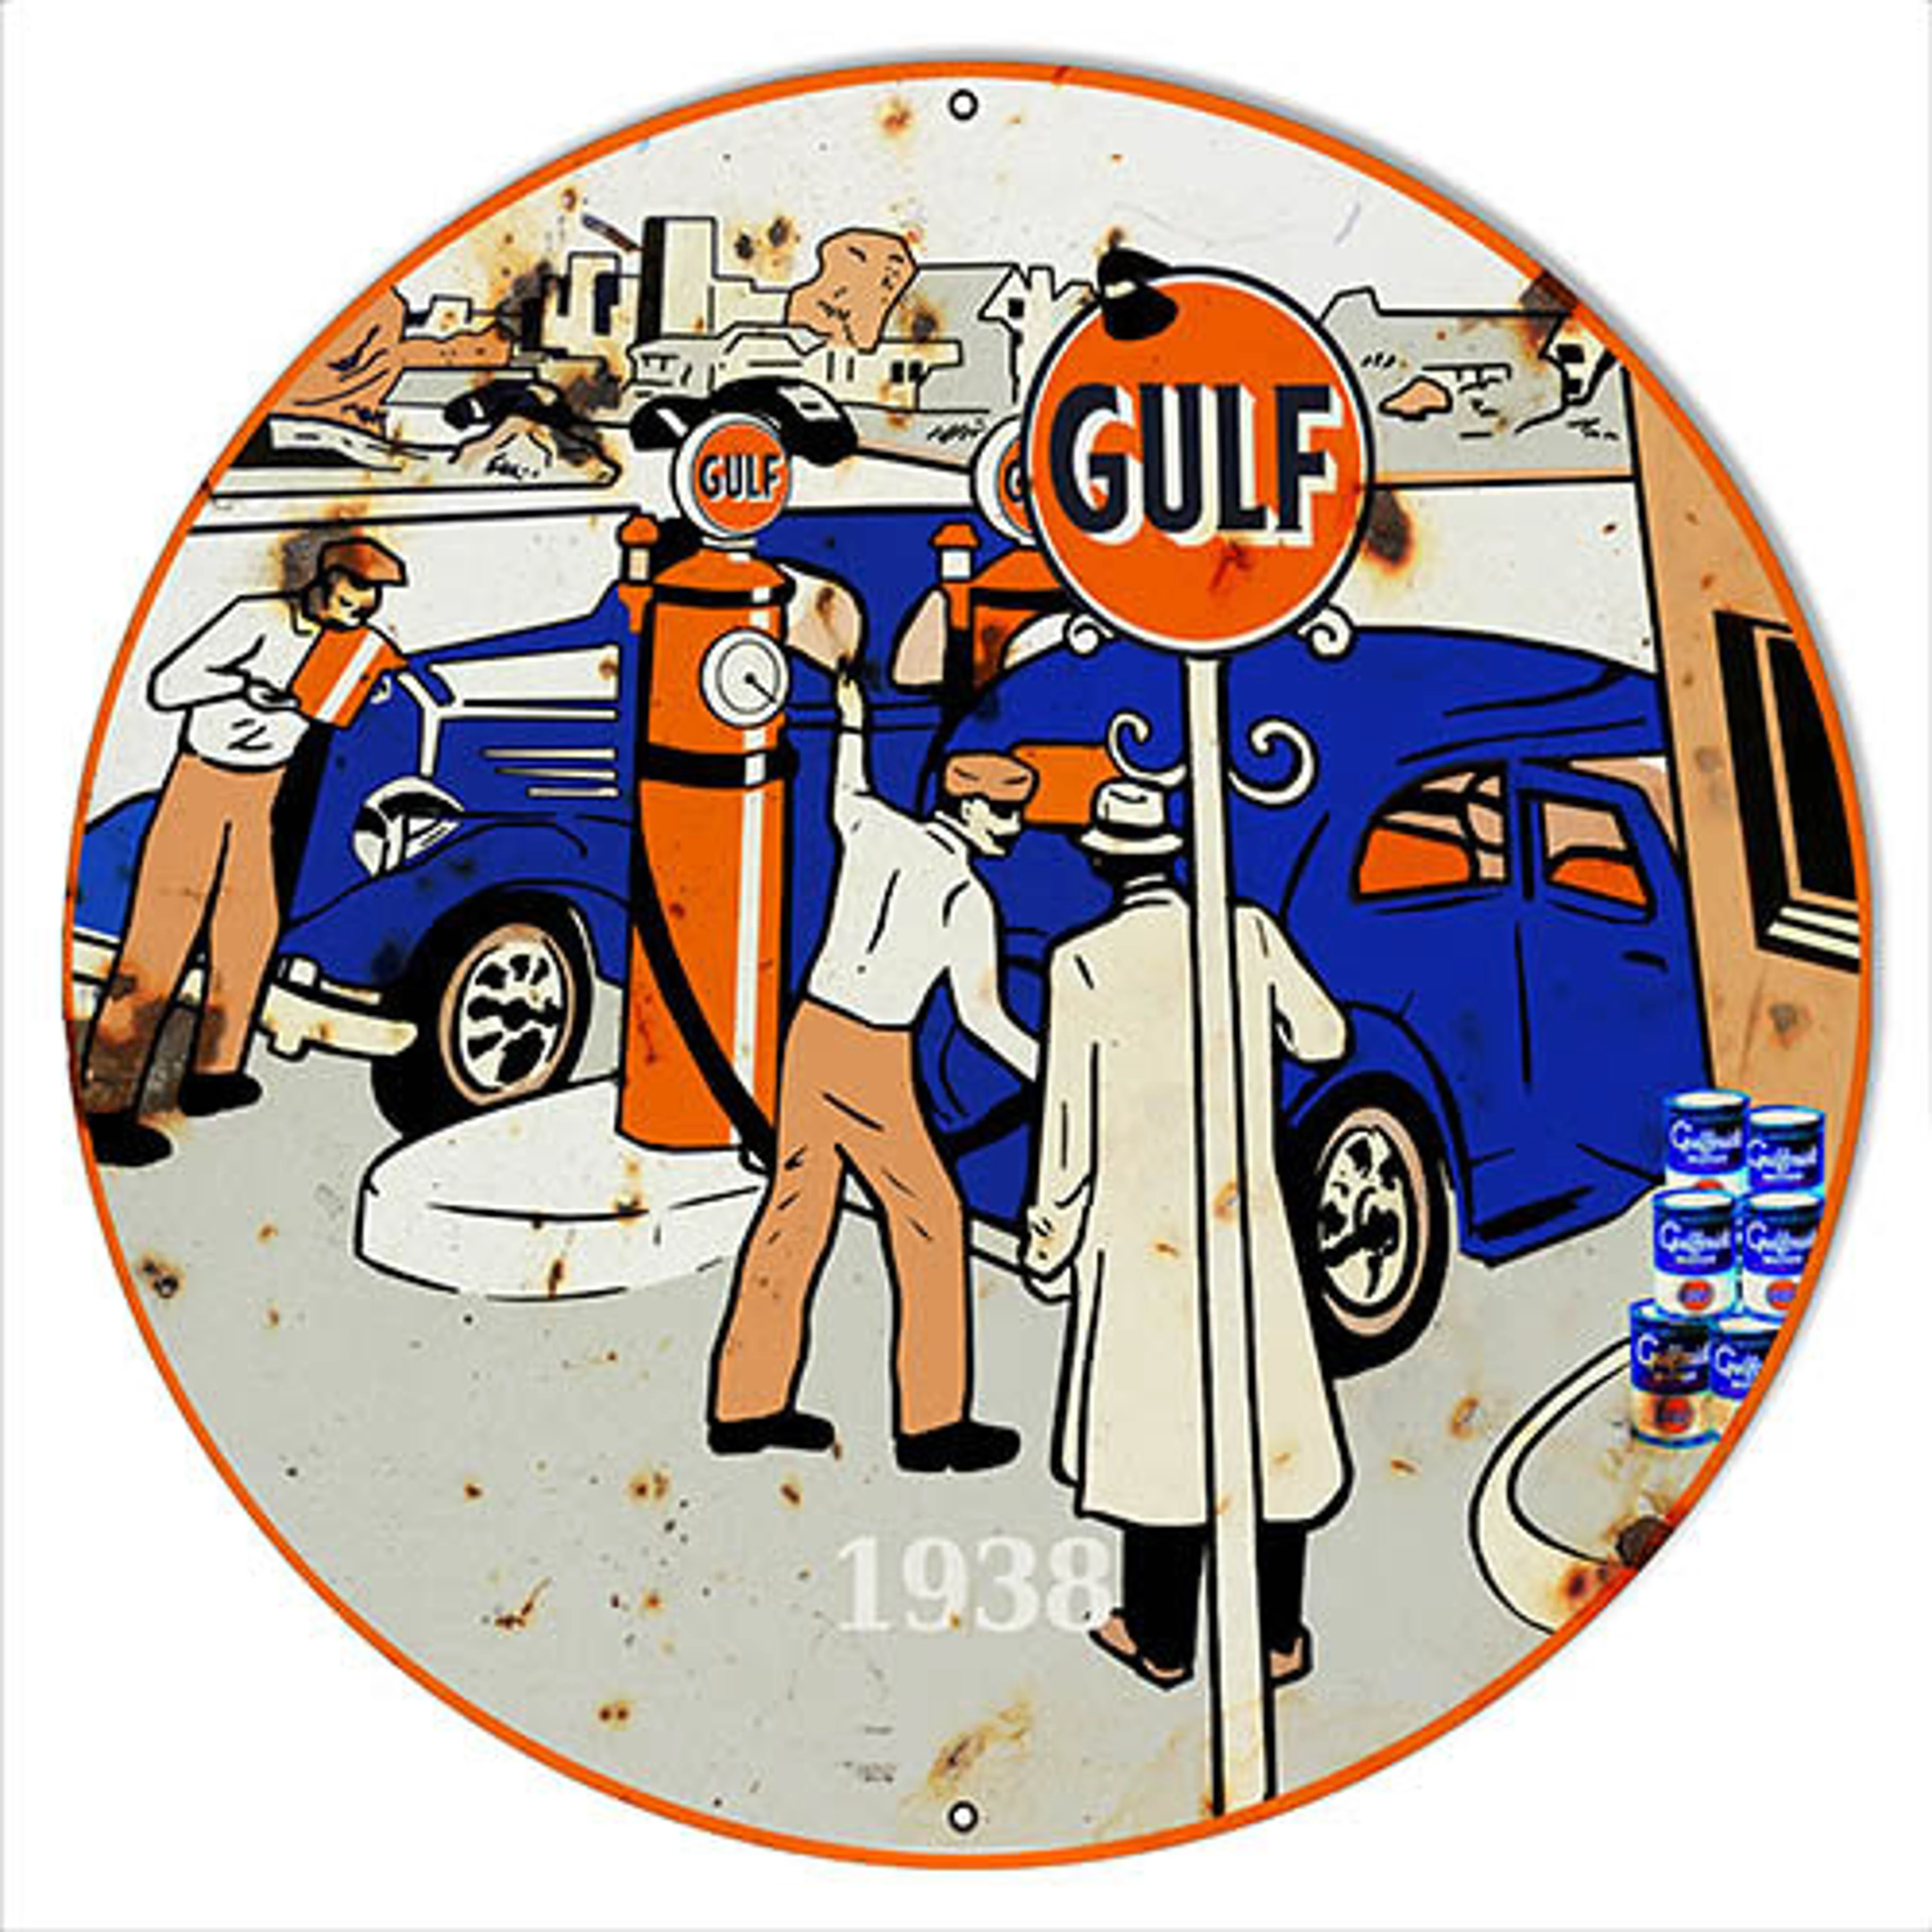 Gulf Fuel Oil Gasoline Dealer Circa 1938 Sign Aged Style OR New Style 4 Sizes 22 Gauge Metal Sign Vintage Style Retro Garage Art RG